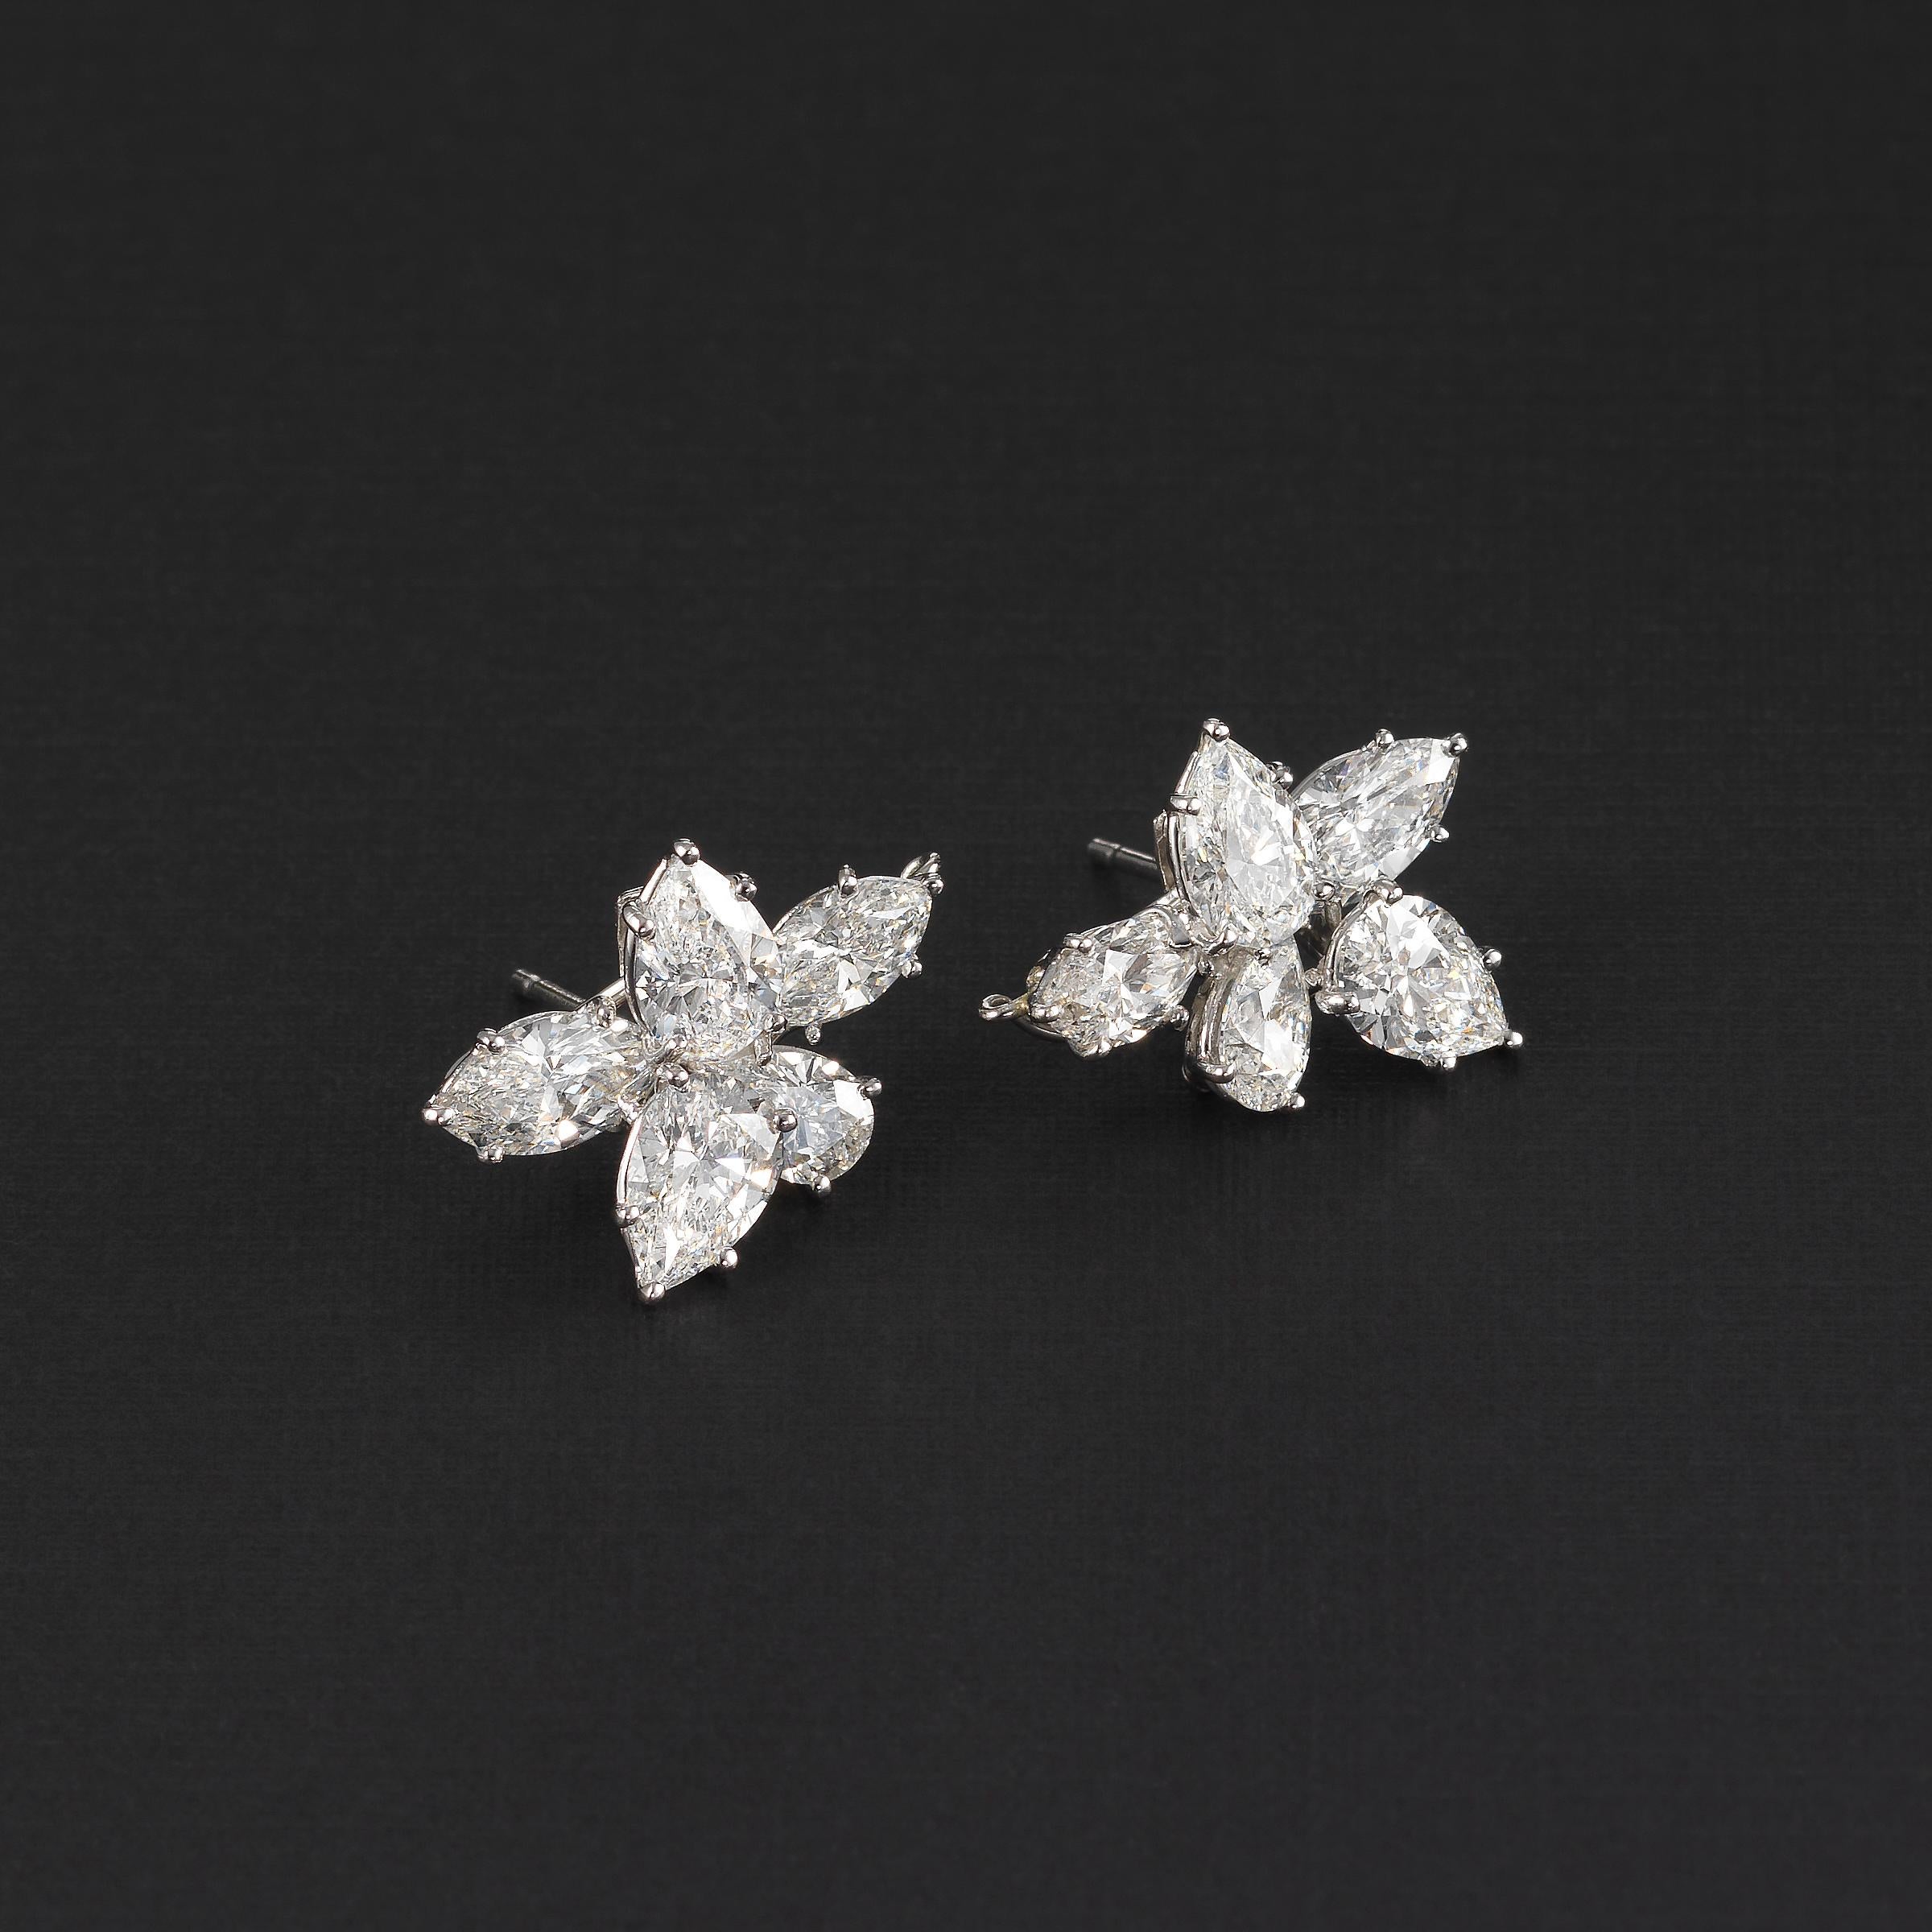 Harry Winston Classic Diamond Cluster Earrings in Platinum and 18K Gold In Excellent Condition For Sale In Dallas, TX